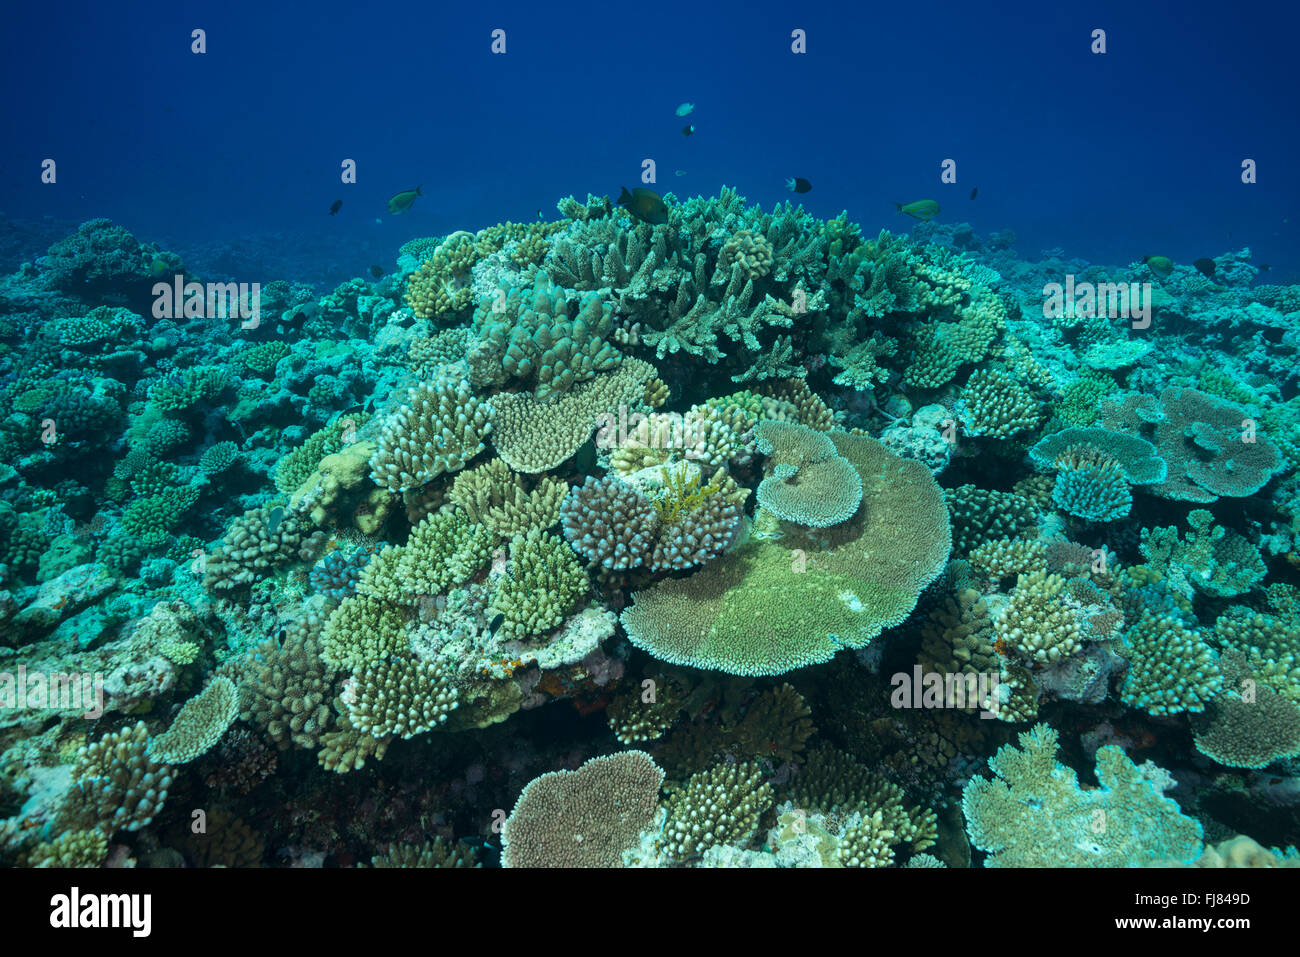 Healthy coral reef in the Great Barrier Reef's pink zone. Stock Photo